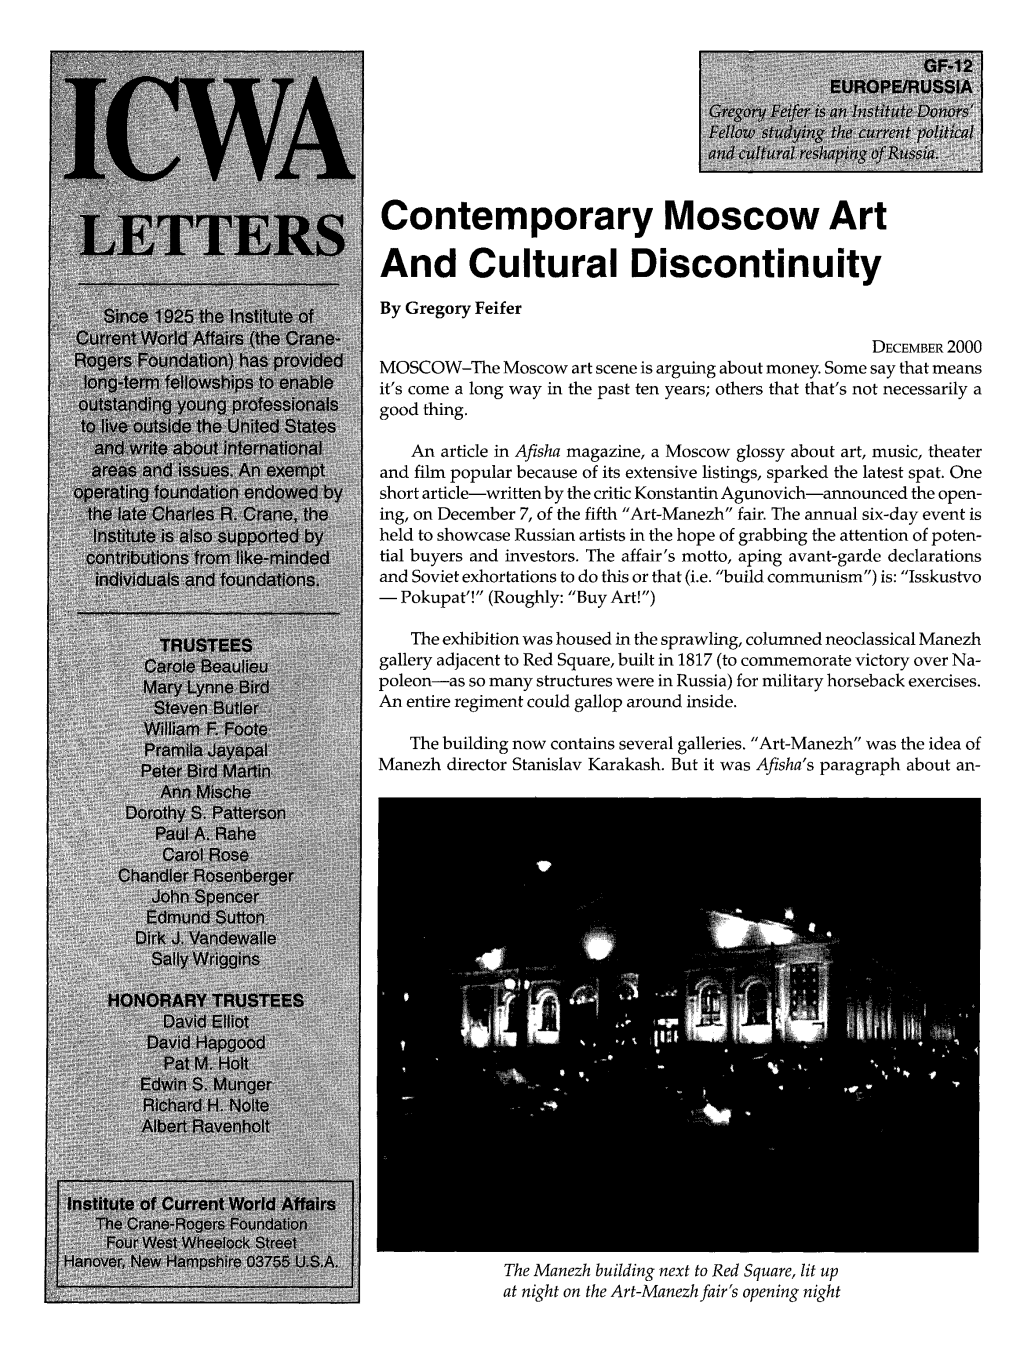 Contemporary Moscow Art and Cultural Discontinuity by Gregory Feifer DECEMBER 2000 MOSCOW-The Moscow Art Scene Is Arguing About Money